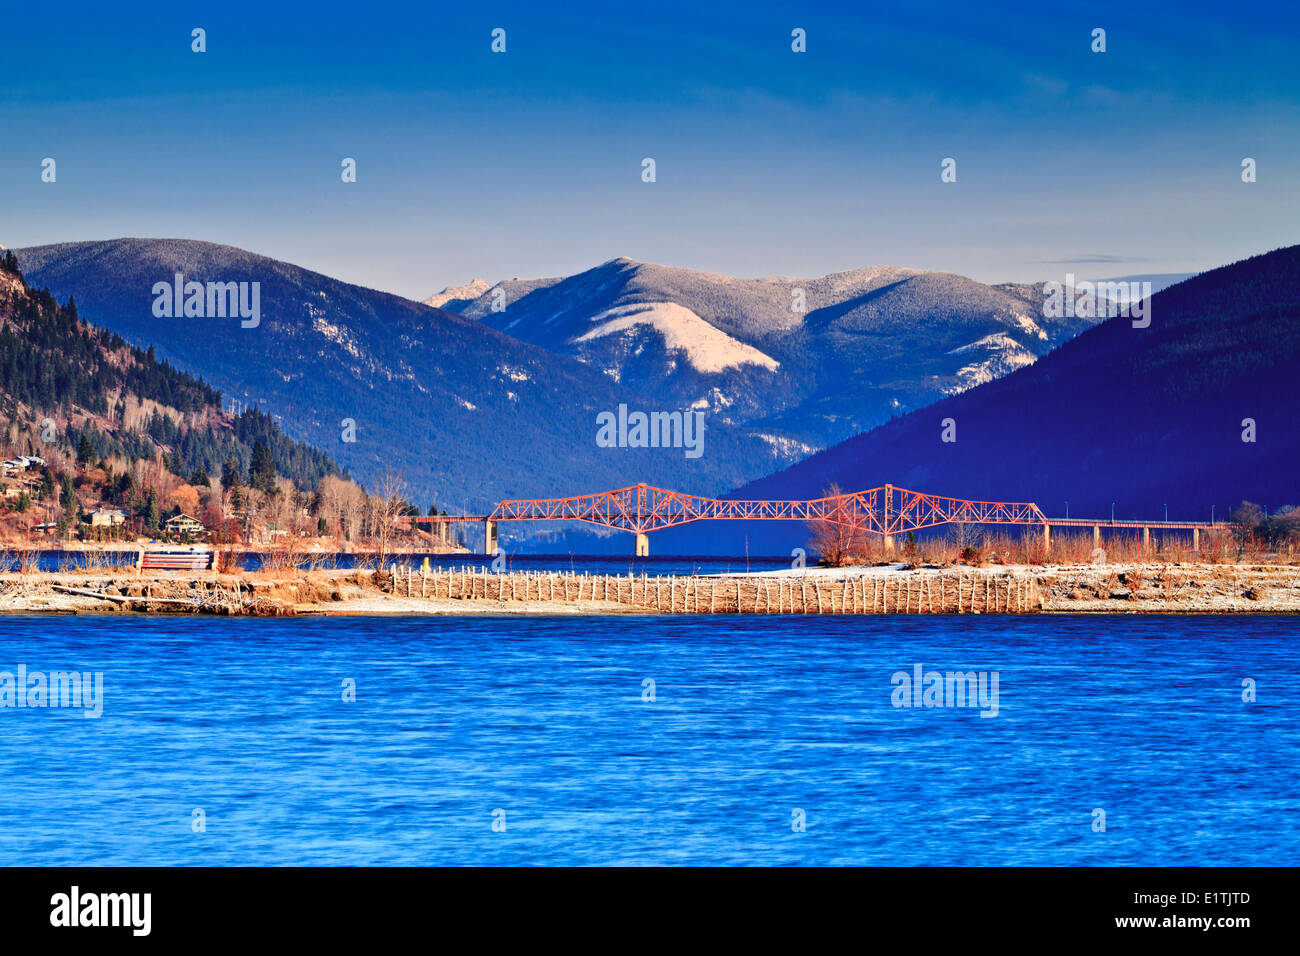 A sunny early winter day on the waterfront in Nelson, BC with the Big Orange Bridge in the background. Stock Photo